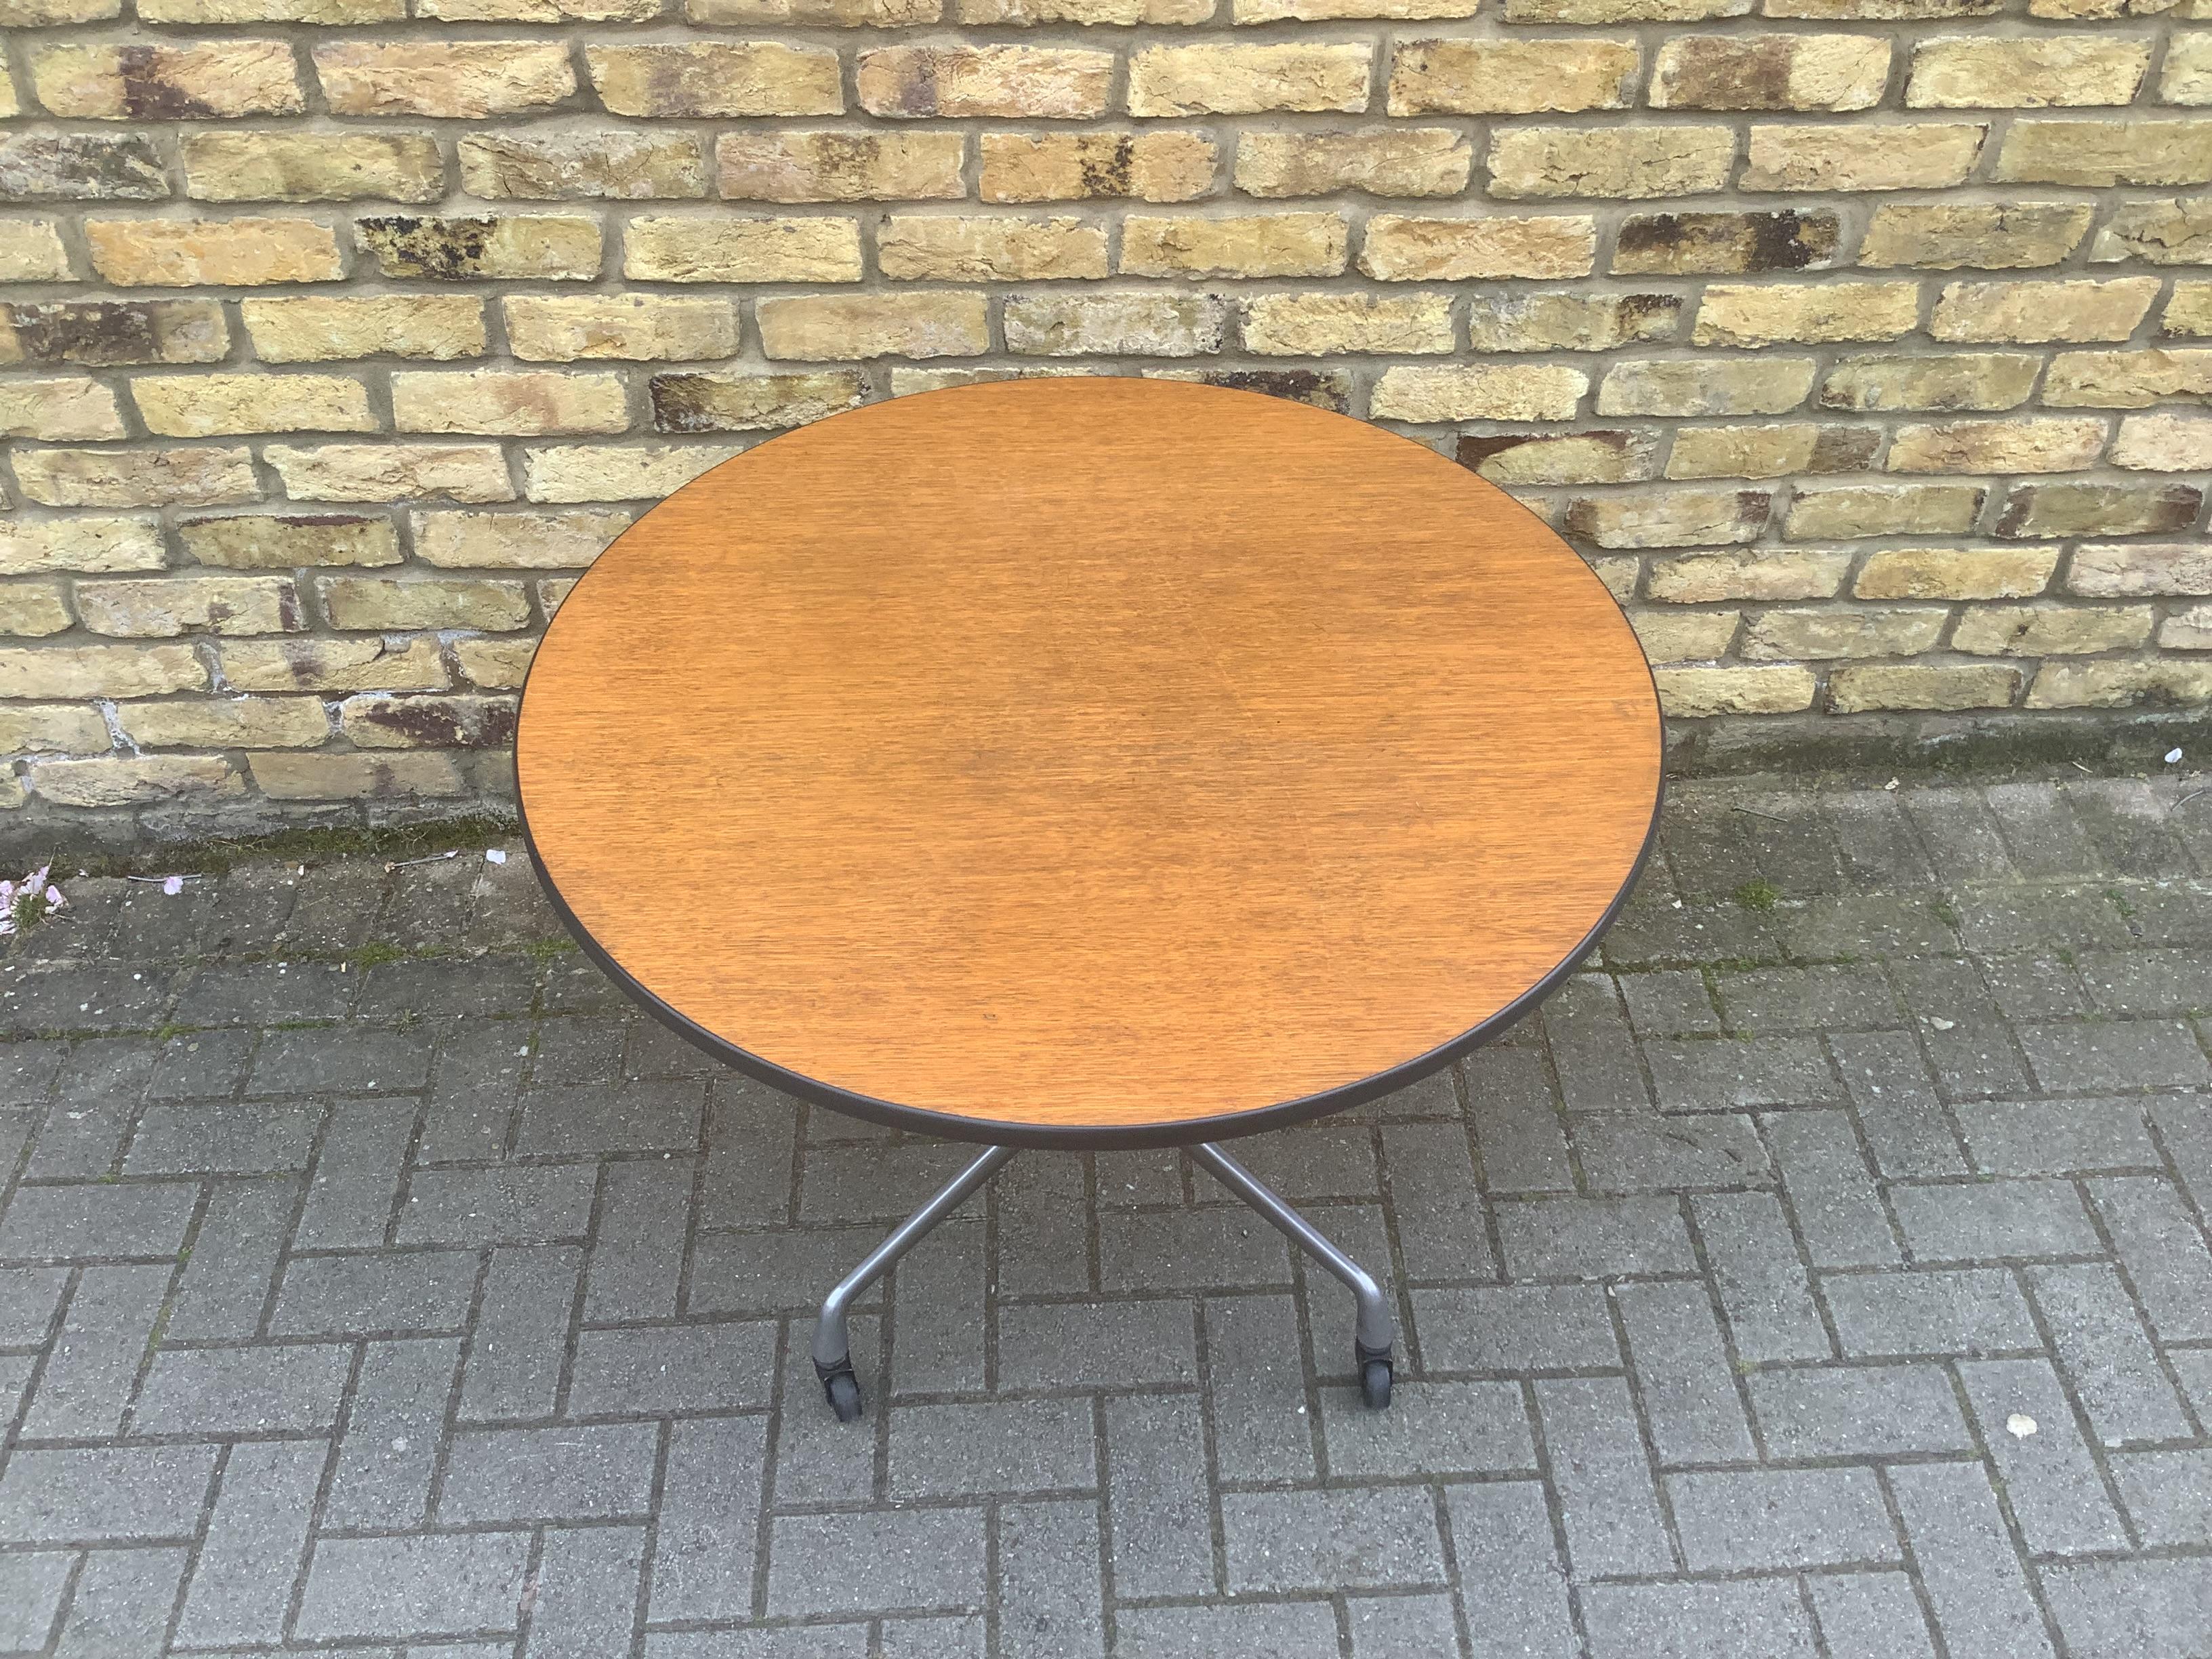 A beautifully styled and iconic vintage table designed by Charles & Ray Eames and made by Herman Miller. This dates from around the 1960-70's, the condition is very good for its age. The Oak veneered top has some light wear to the surface. A useful